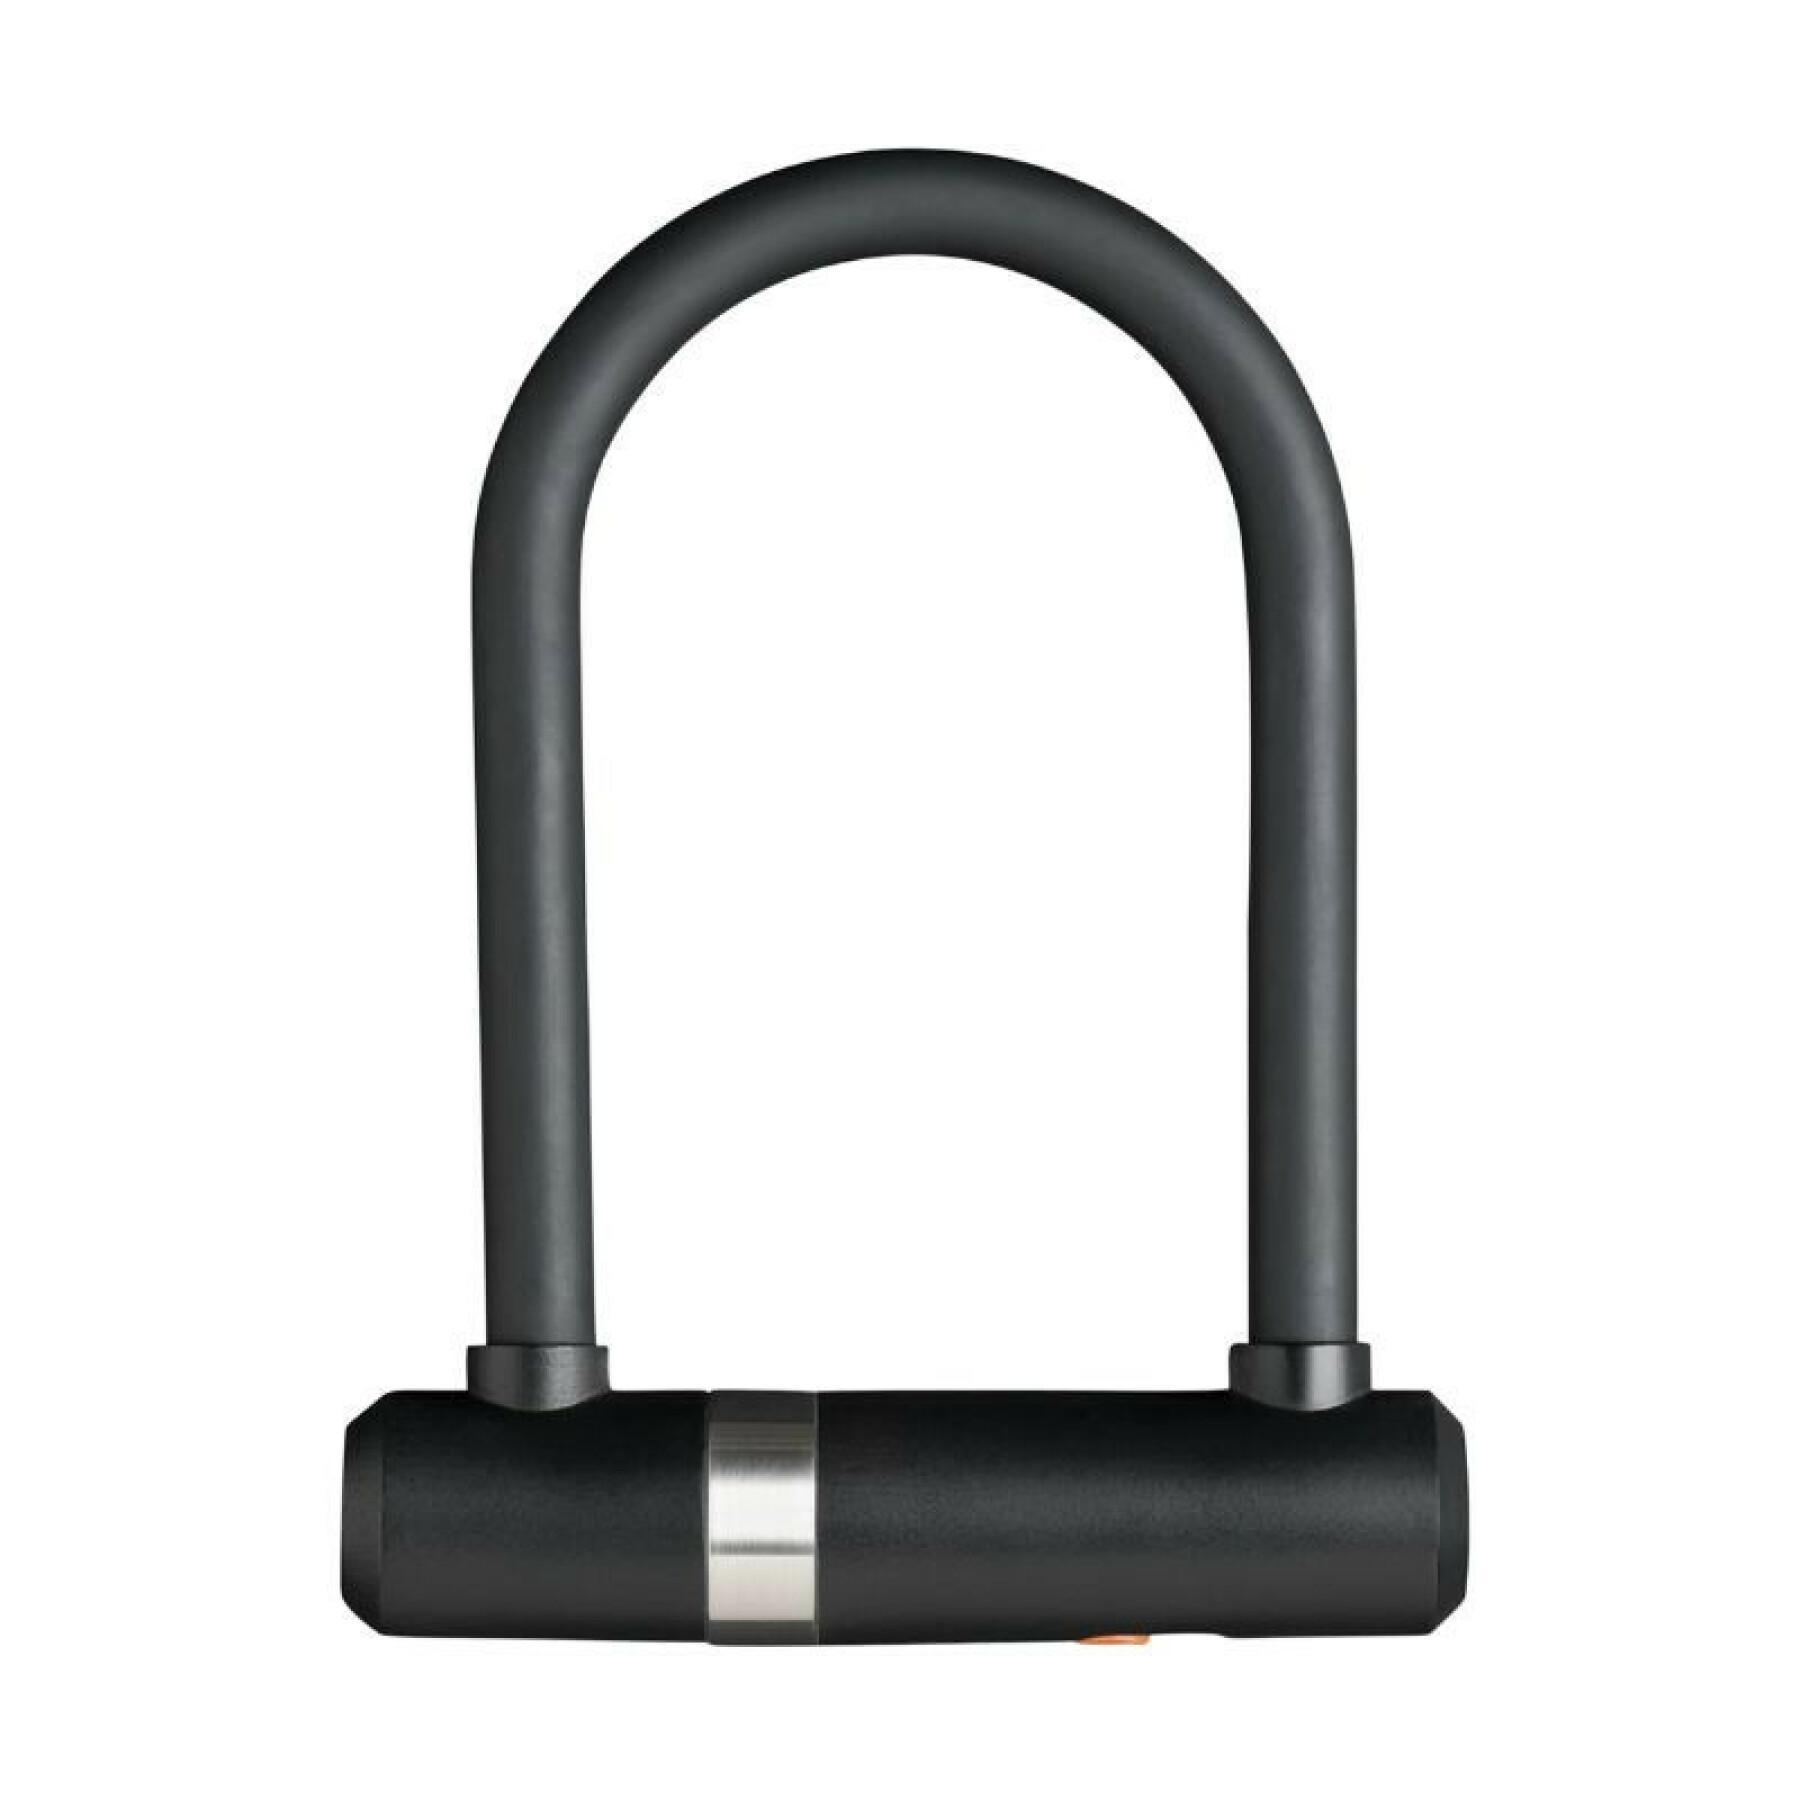 Bike lock with key and cable - ideal for bikes Axa-Basta Newton Pro Sold Secure Niveau Silver